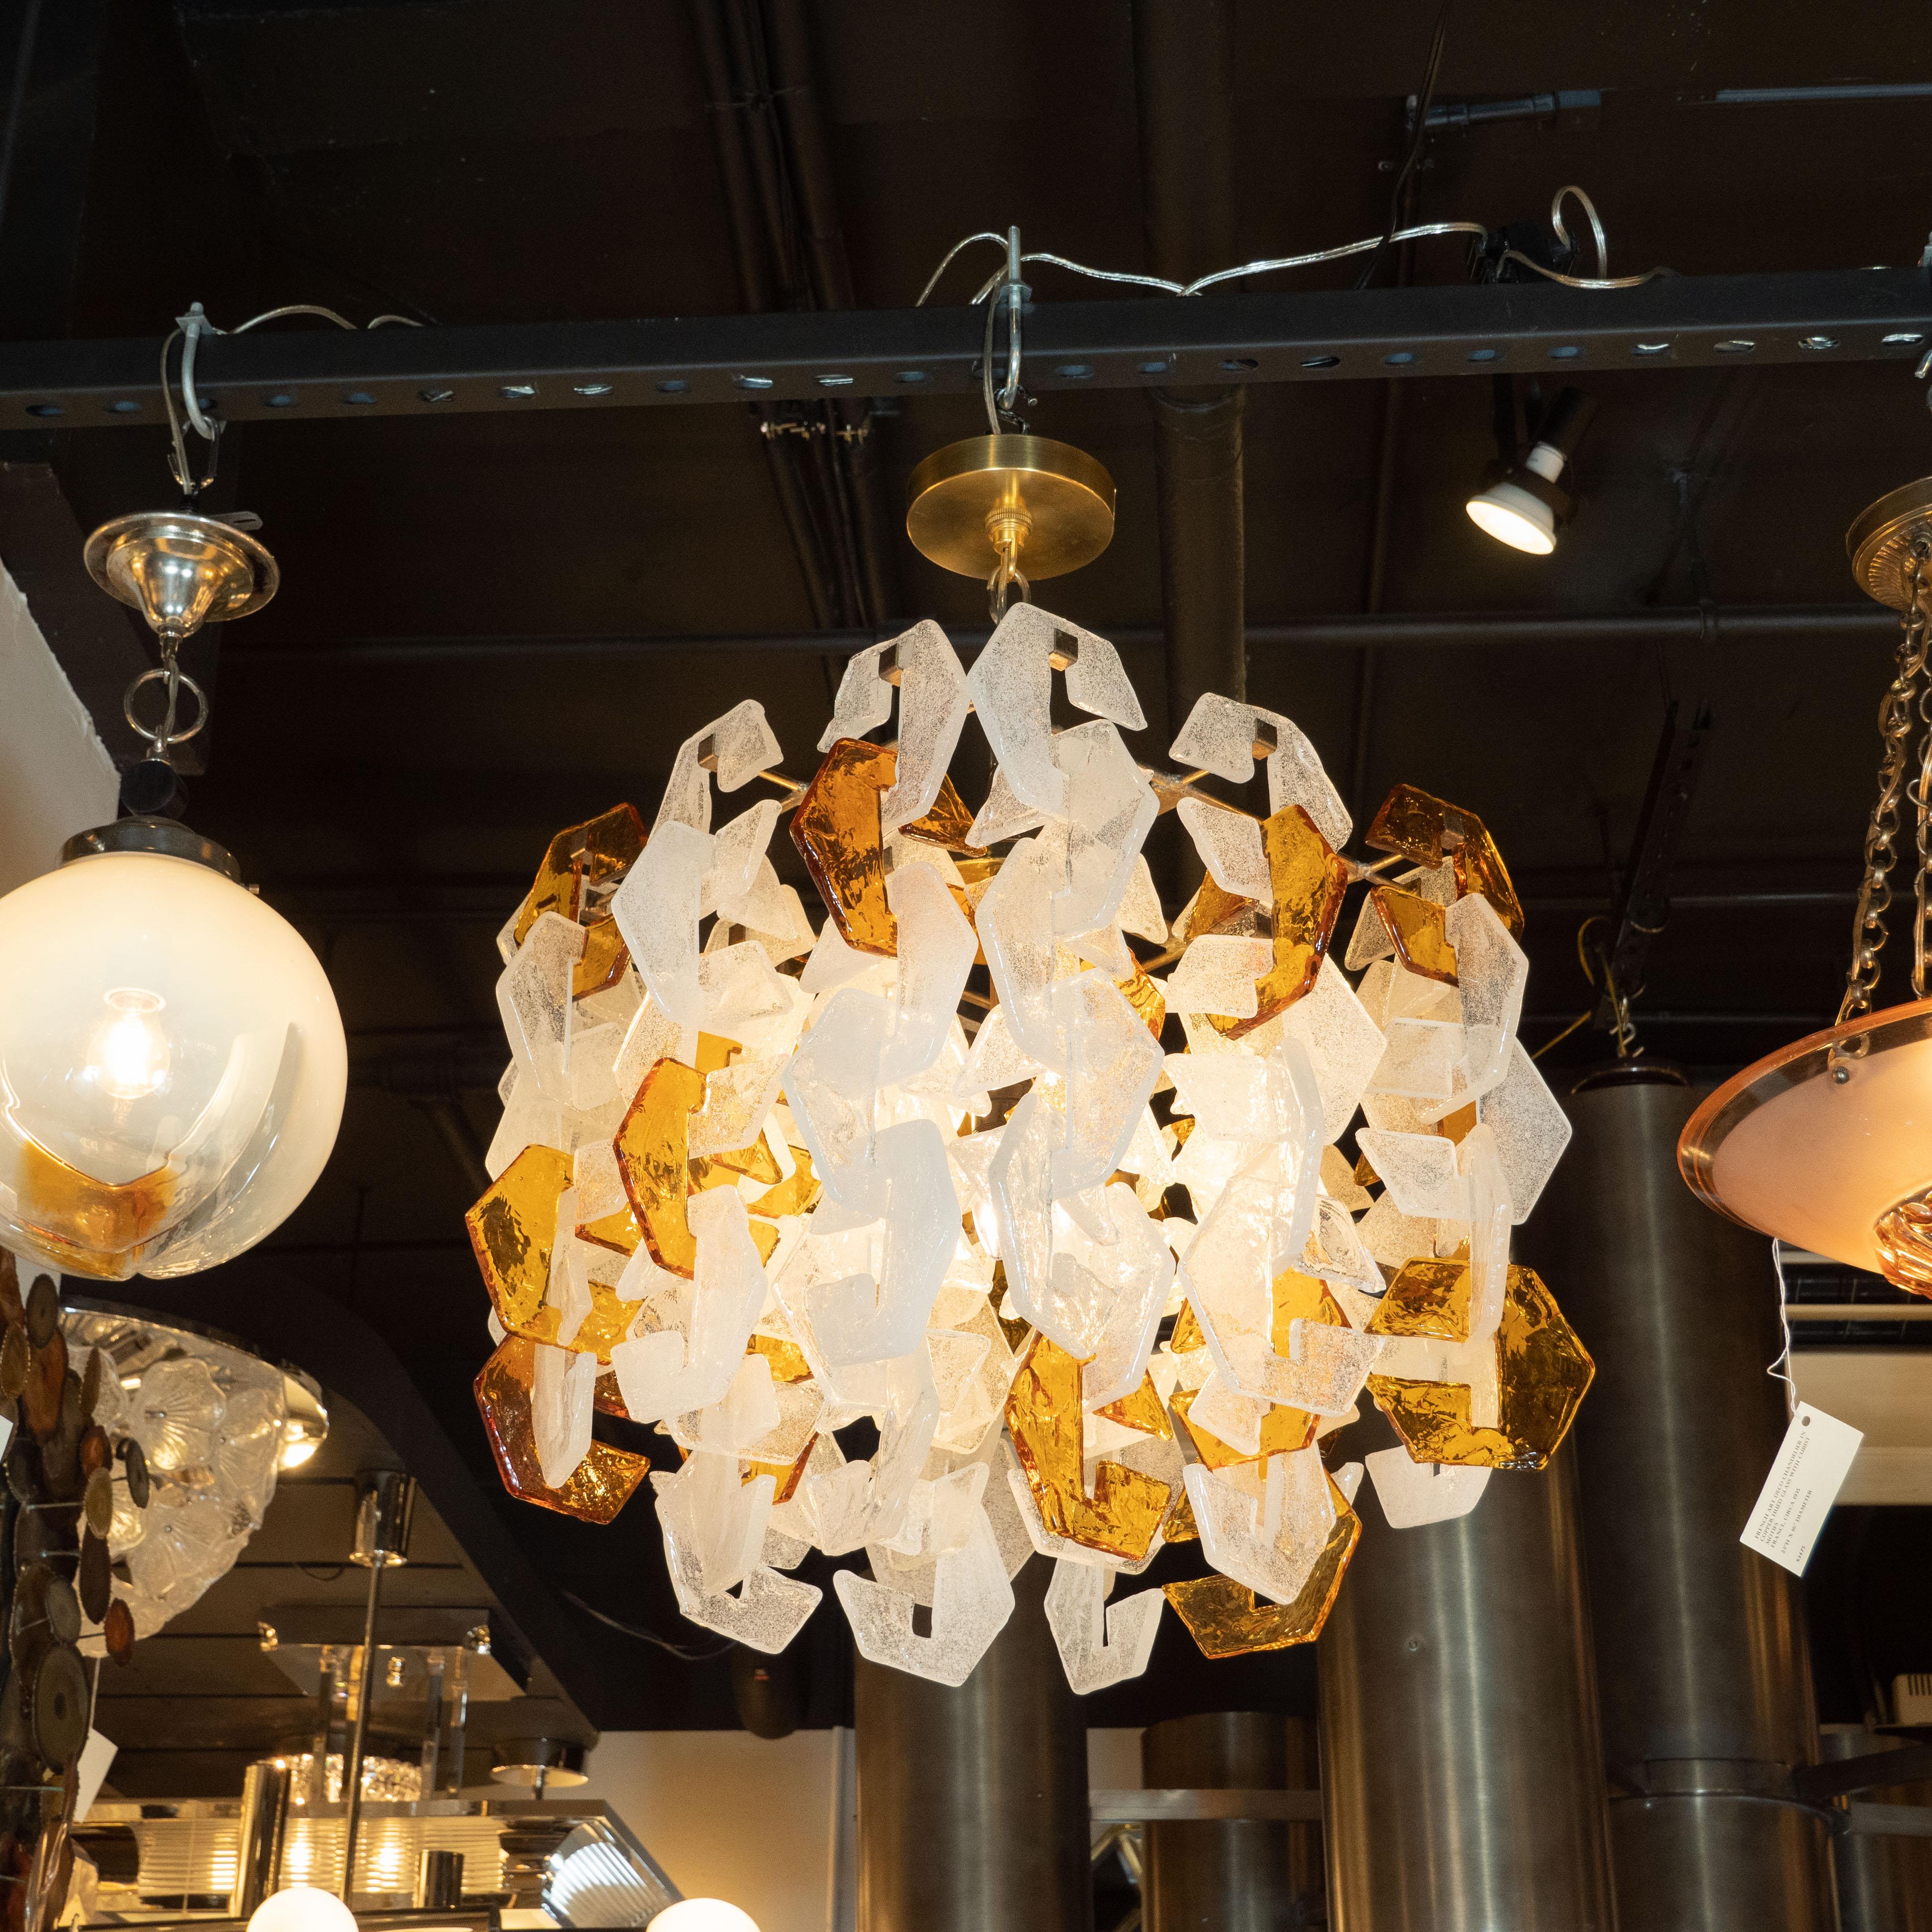 This stunning Mid-Century Modern chandelier was realized by the fabled Italian glass studio, Mazzega, in Murano, circa 1970. It features an abundance of interlocking three-sided geometric glass shades in translucent amber and semi opaque white glass